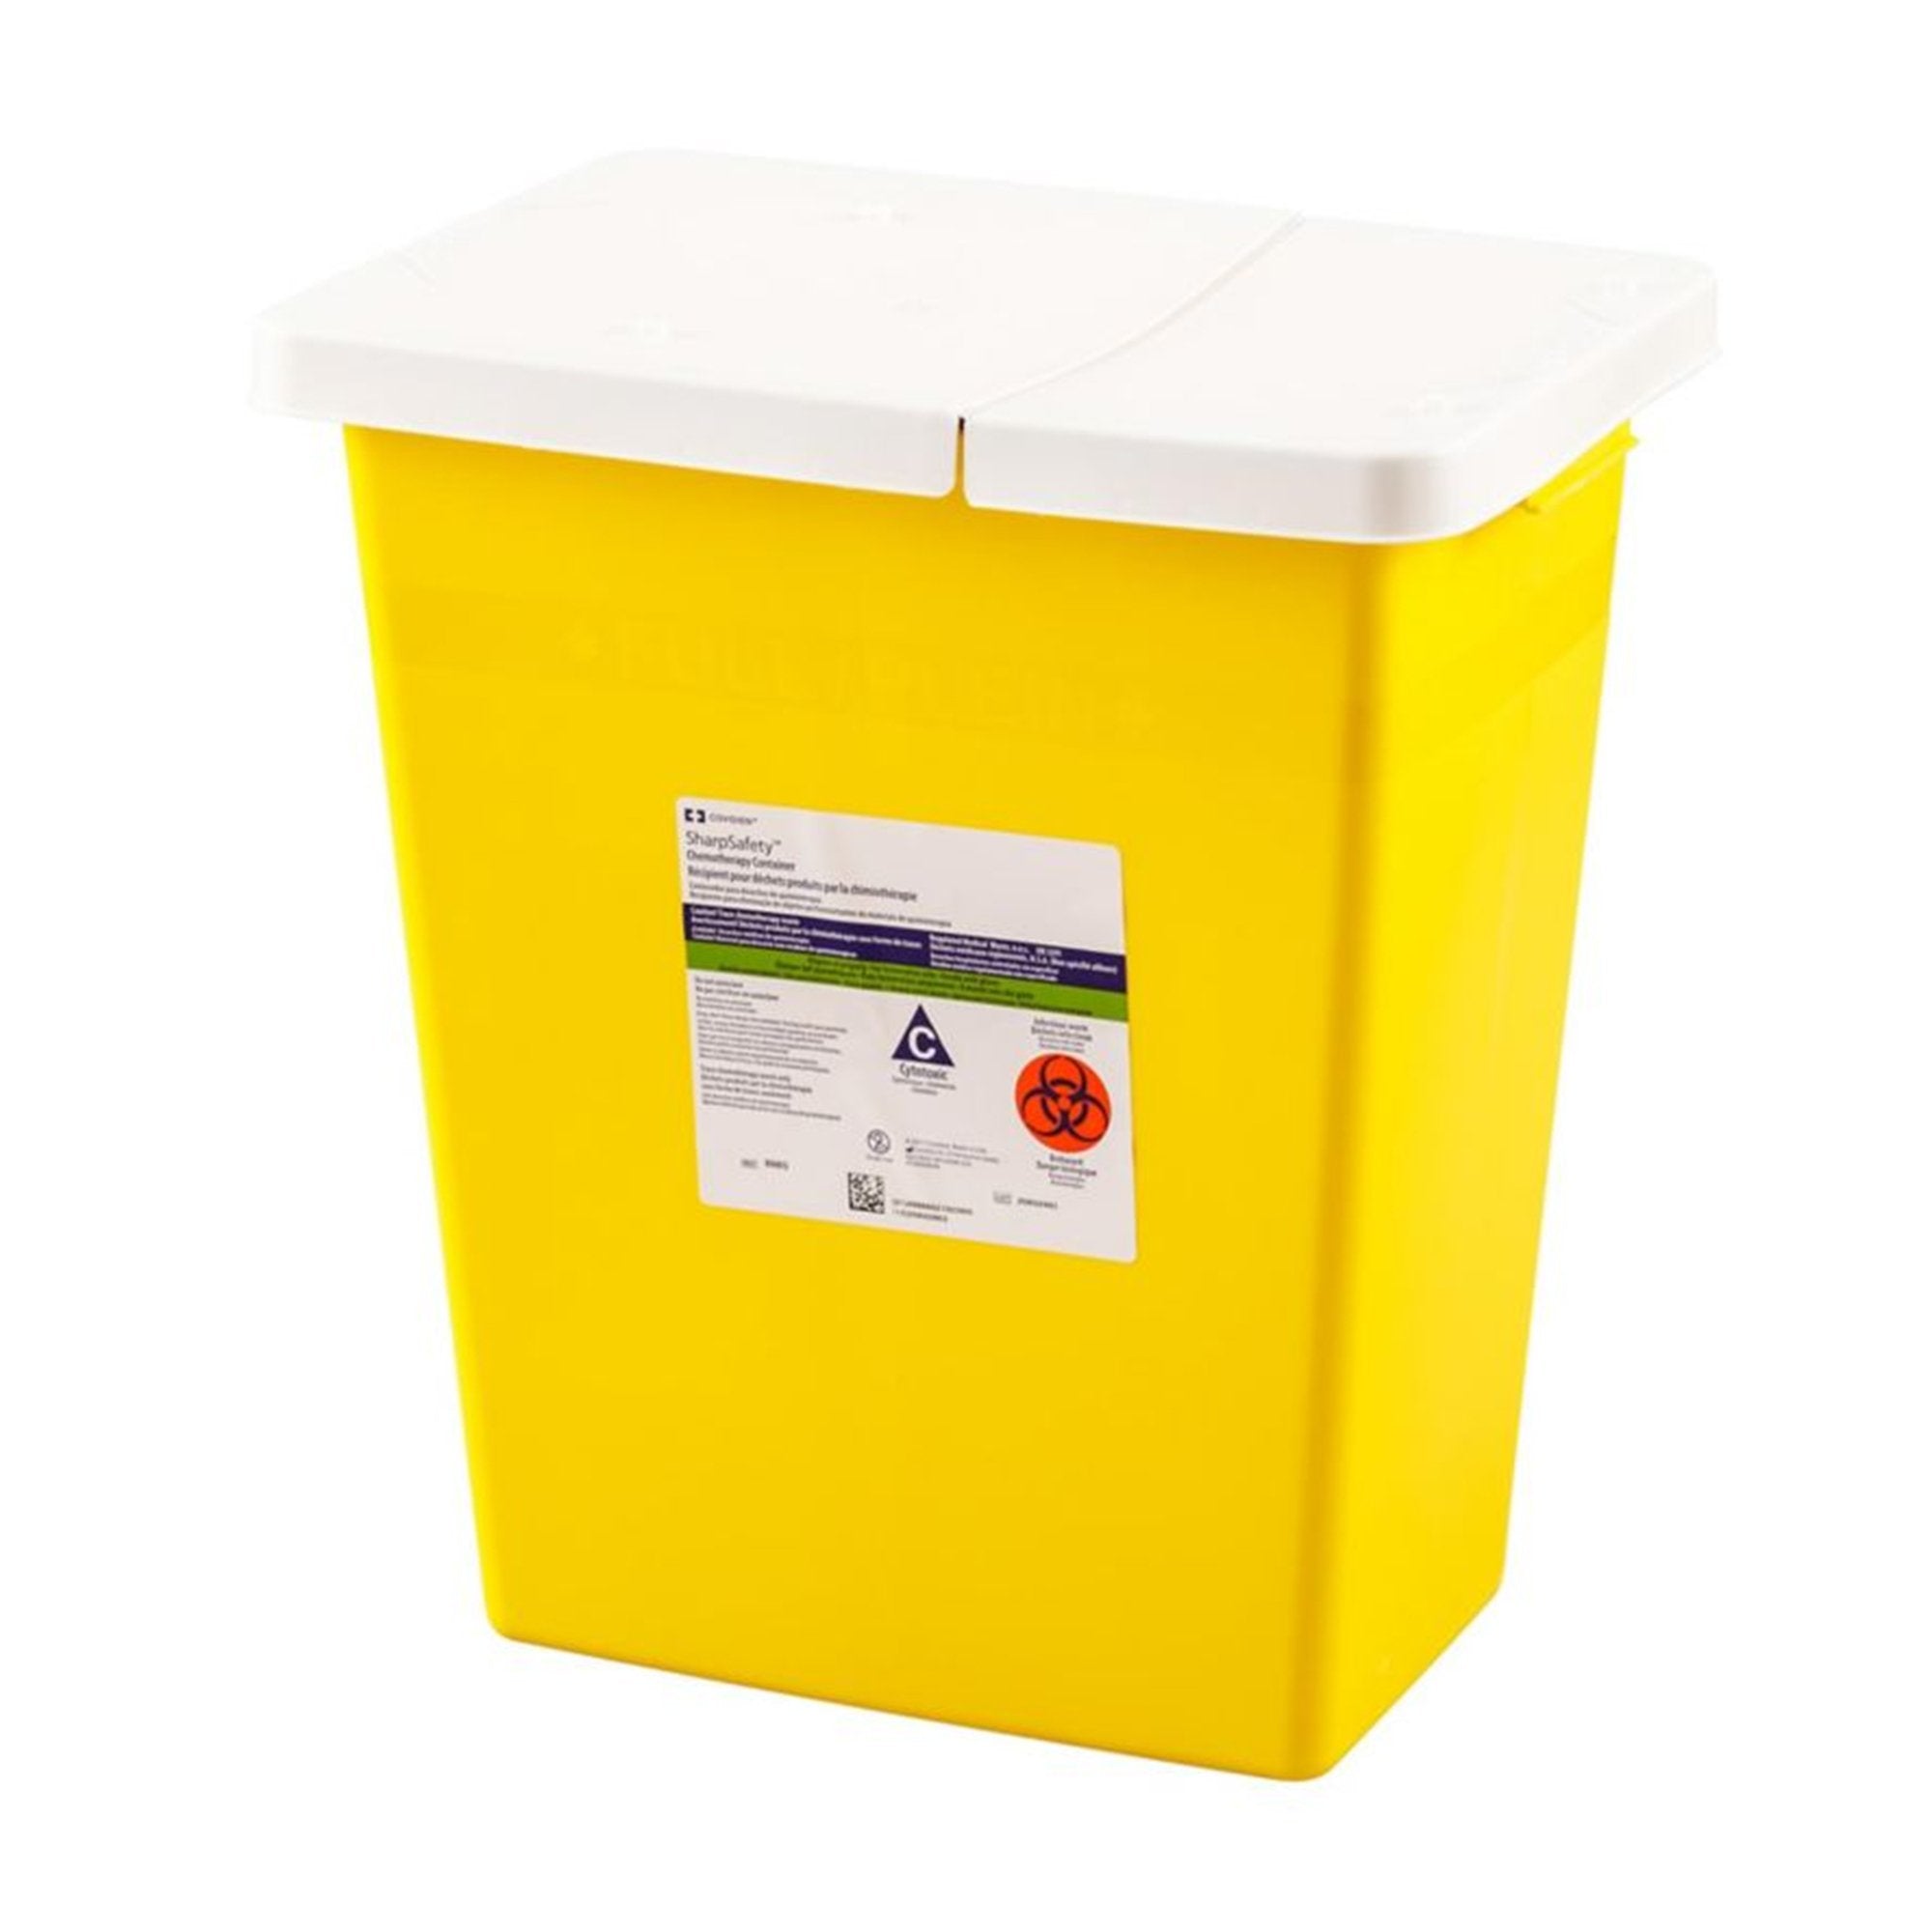 Chemotherapy Waste Container SharpSafety™ Yellow Base 17-1/2 H X 15-1/2 W X 11 D Inch Horizontal / Vertical Entry 8 Gallon